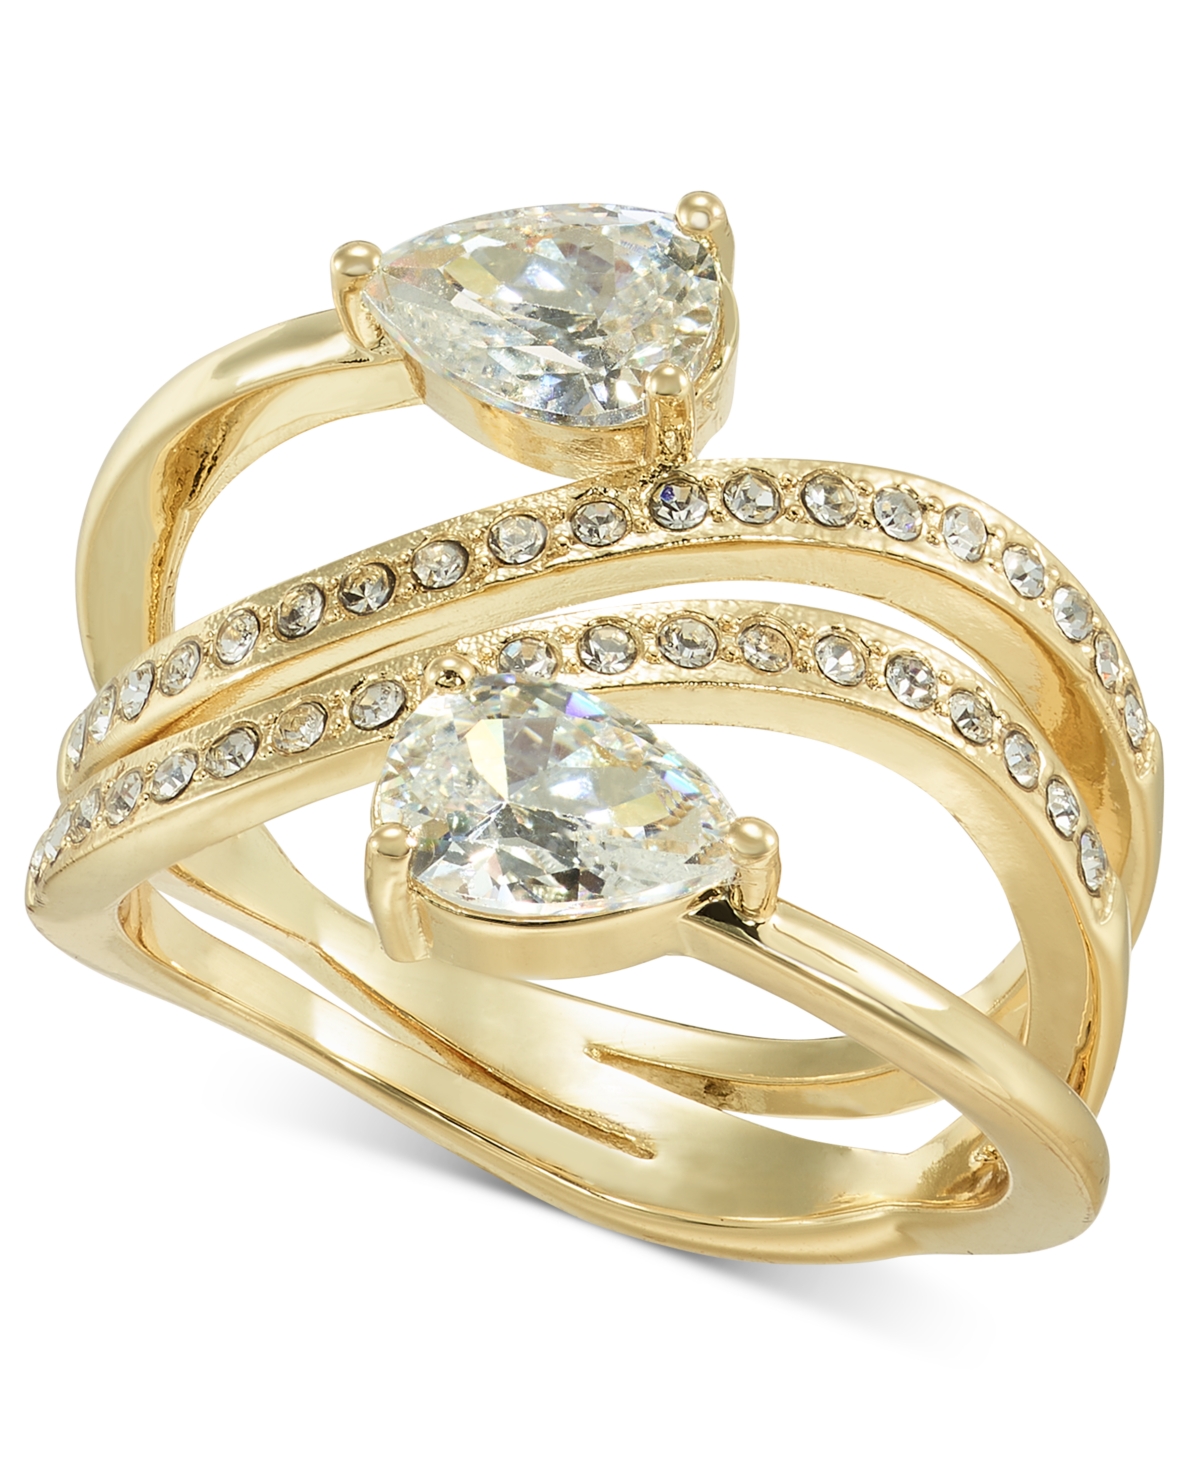 Gold-Tone Pave & Pear-Shape Crystal Wrap Ring, Created for Macy's - Gold